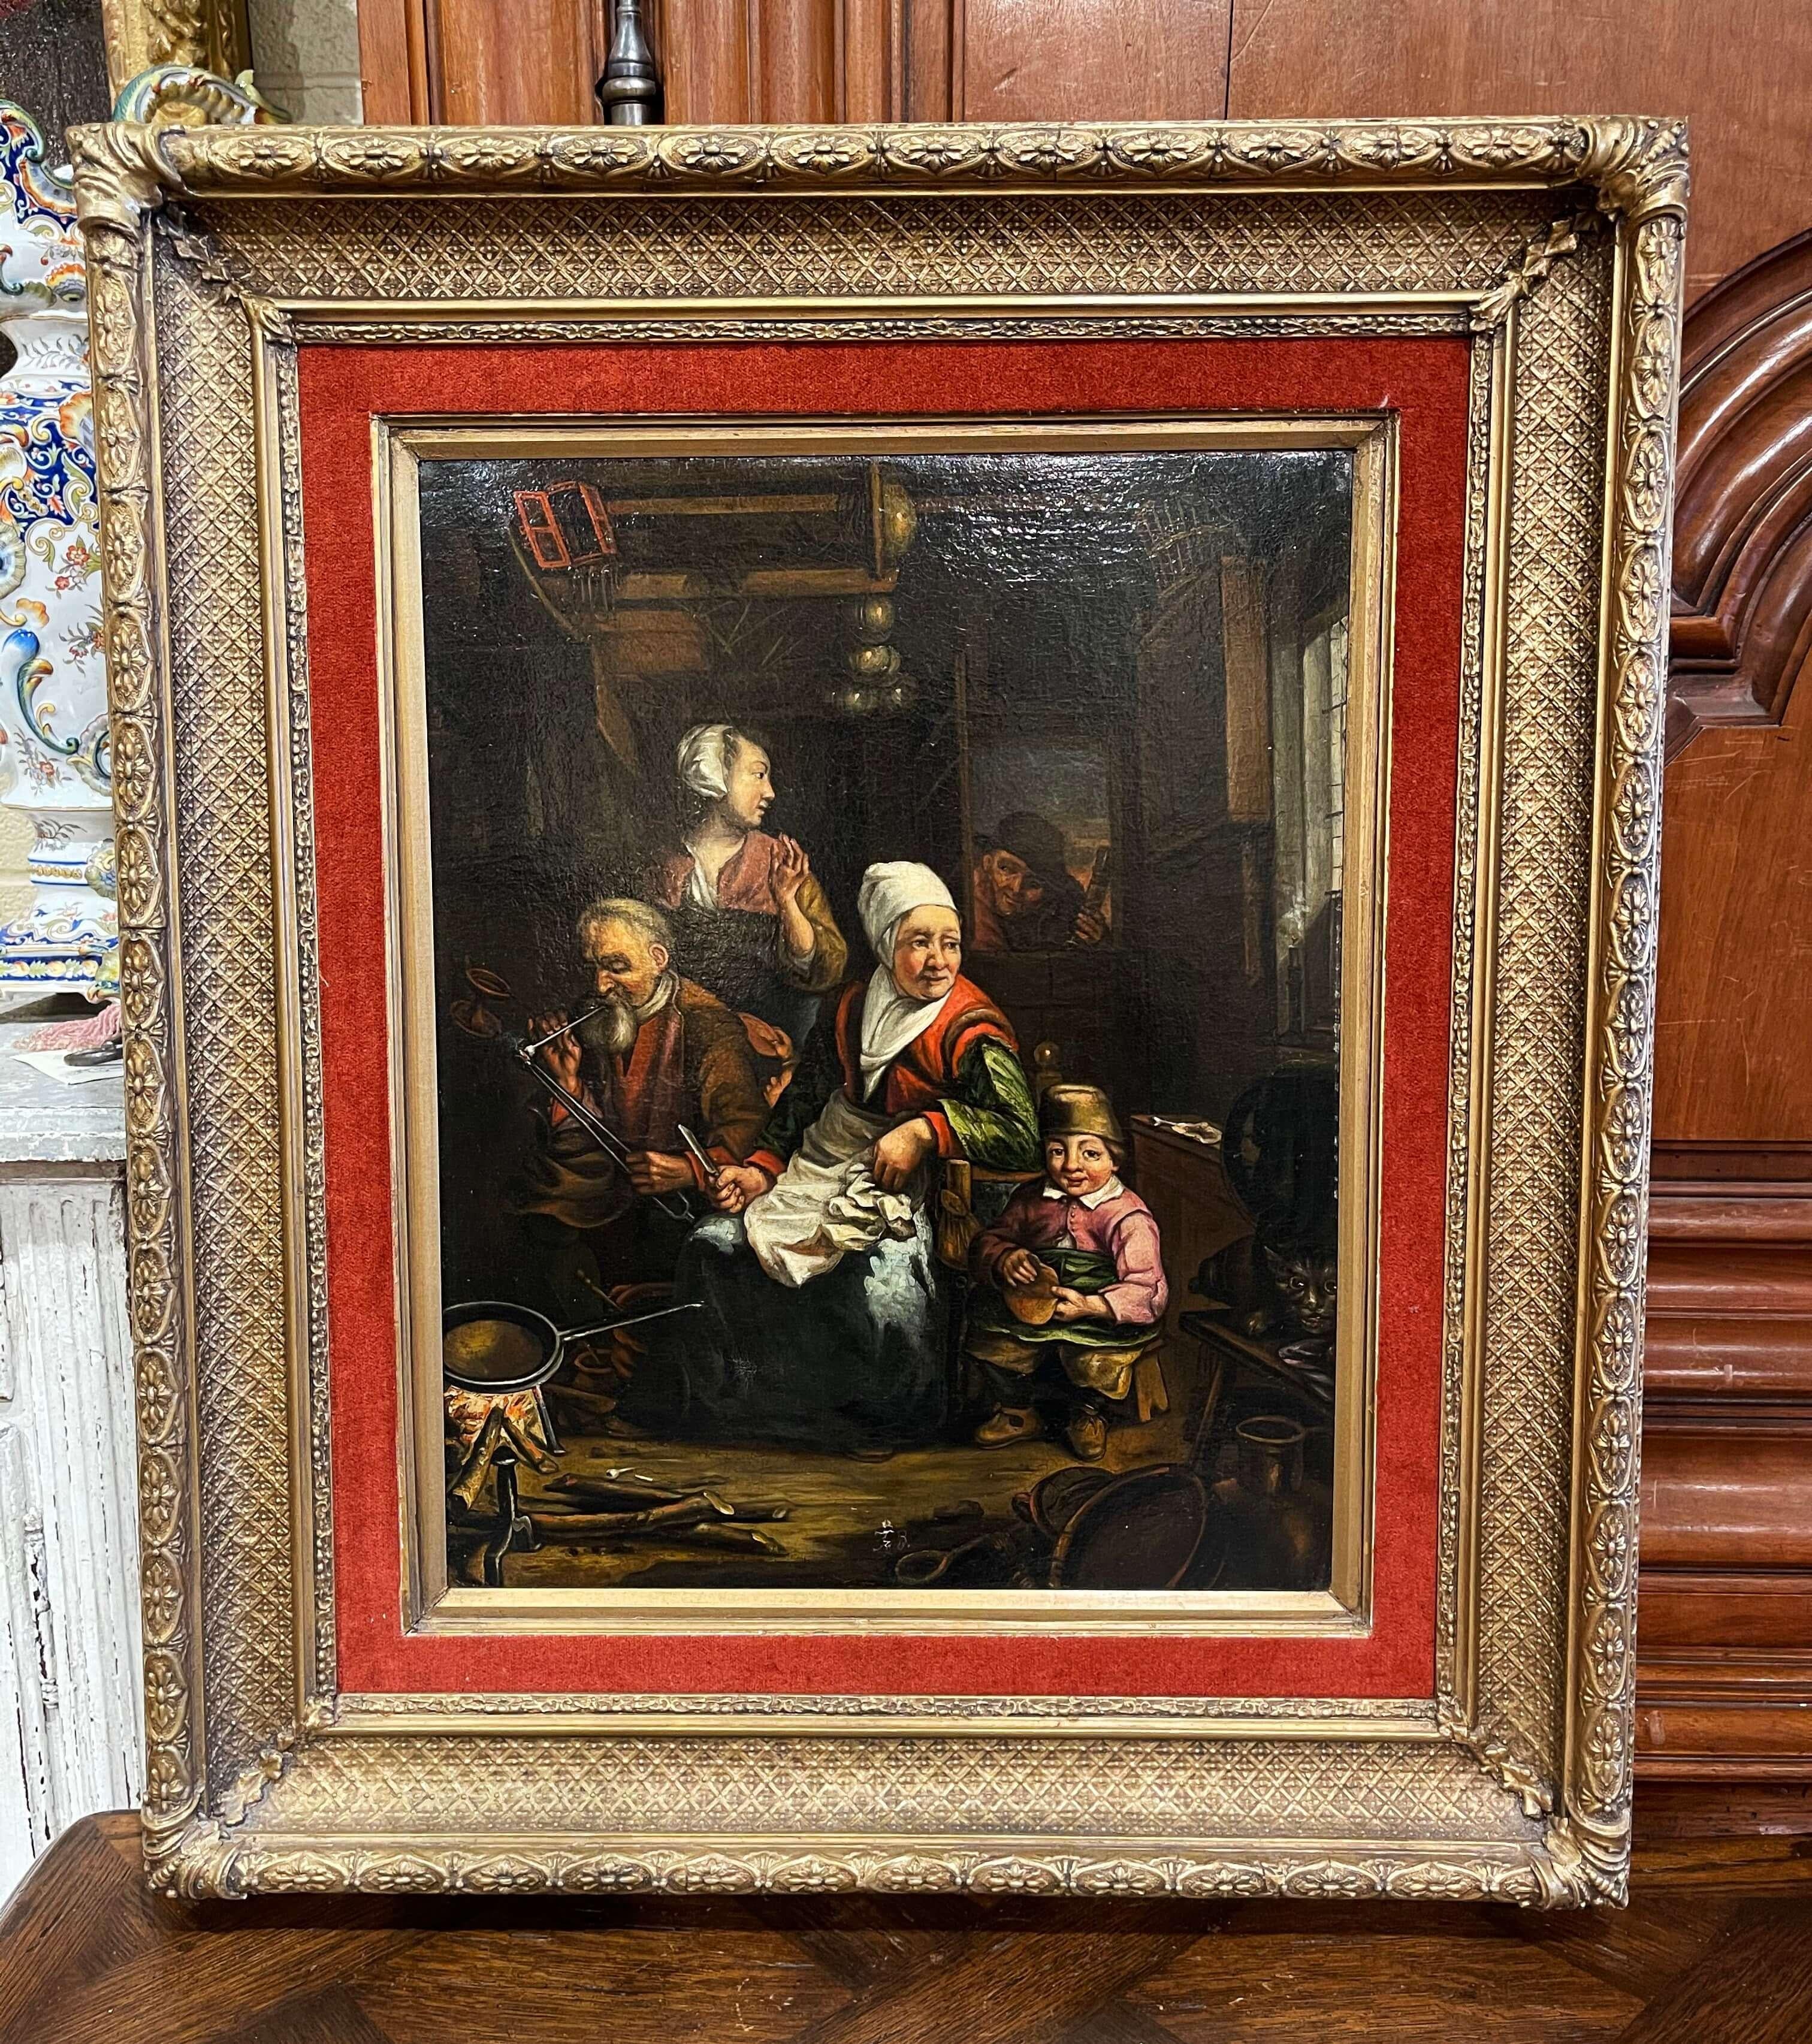 19th Century Dutch Oil on Canvas Painting in Carved Gilt Frame After D. Teniers In Excellent Condition For Sale In Dallas, TX